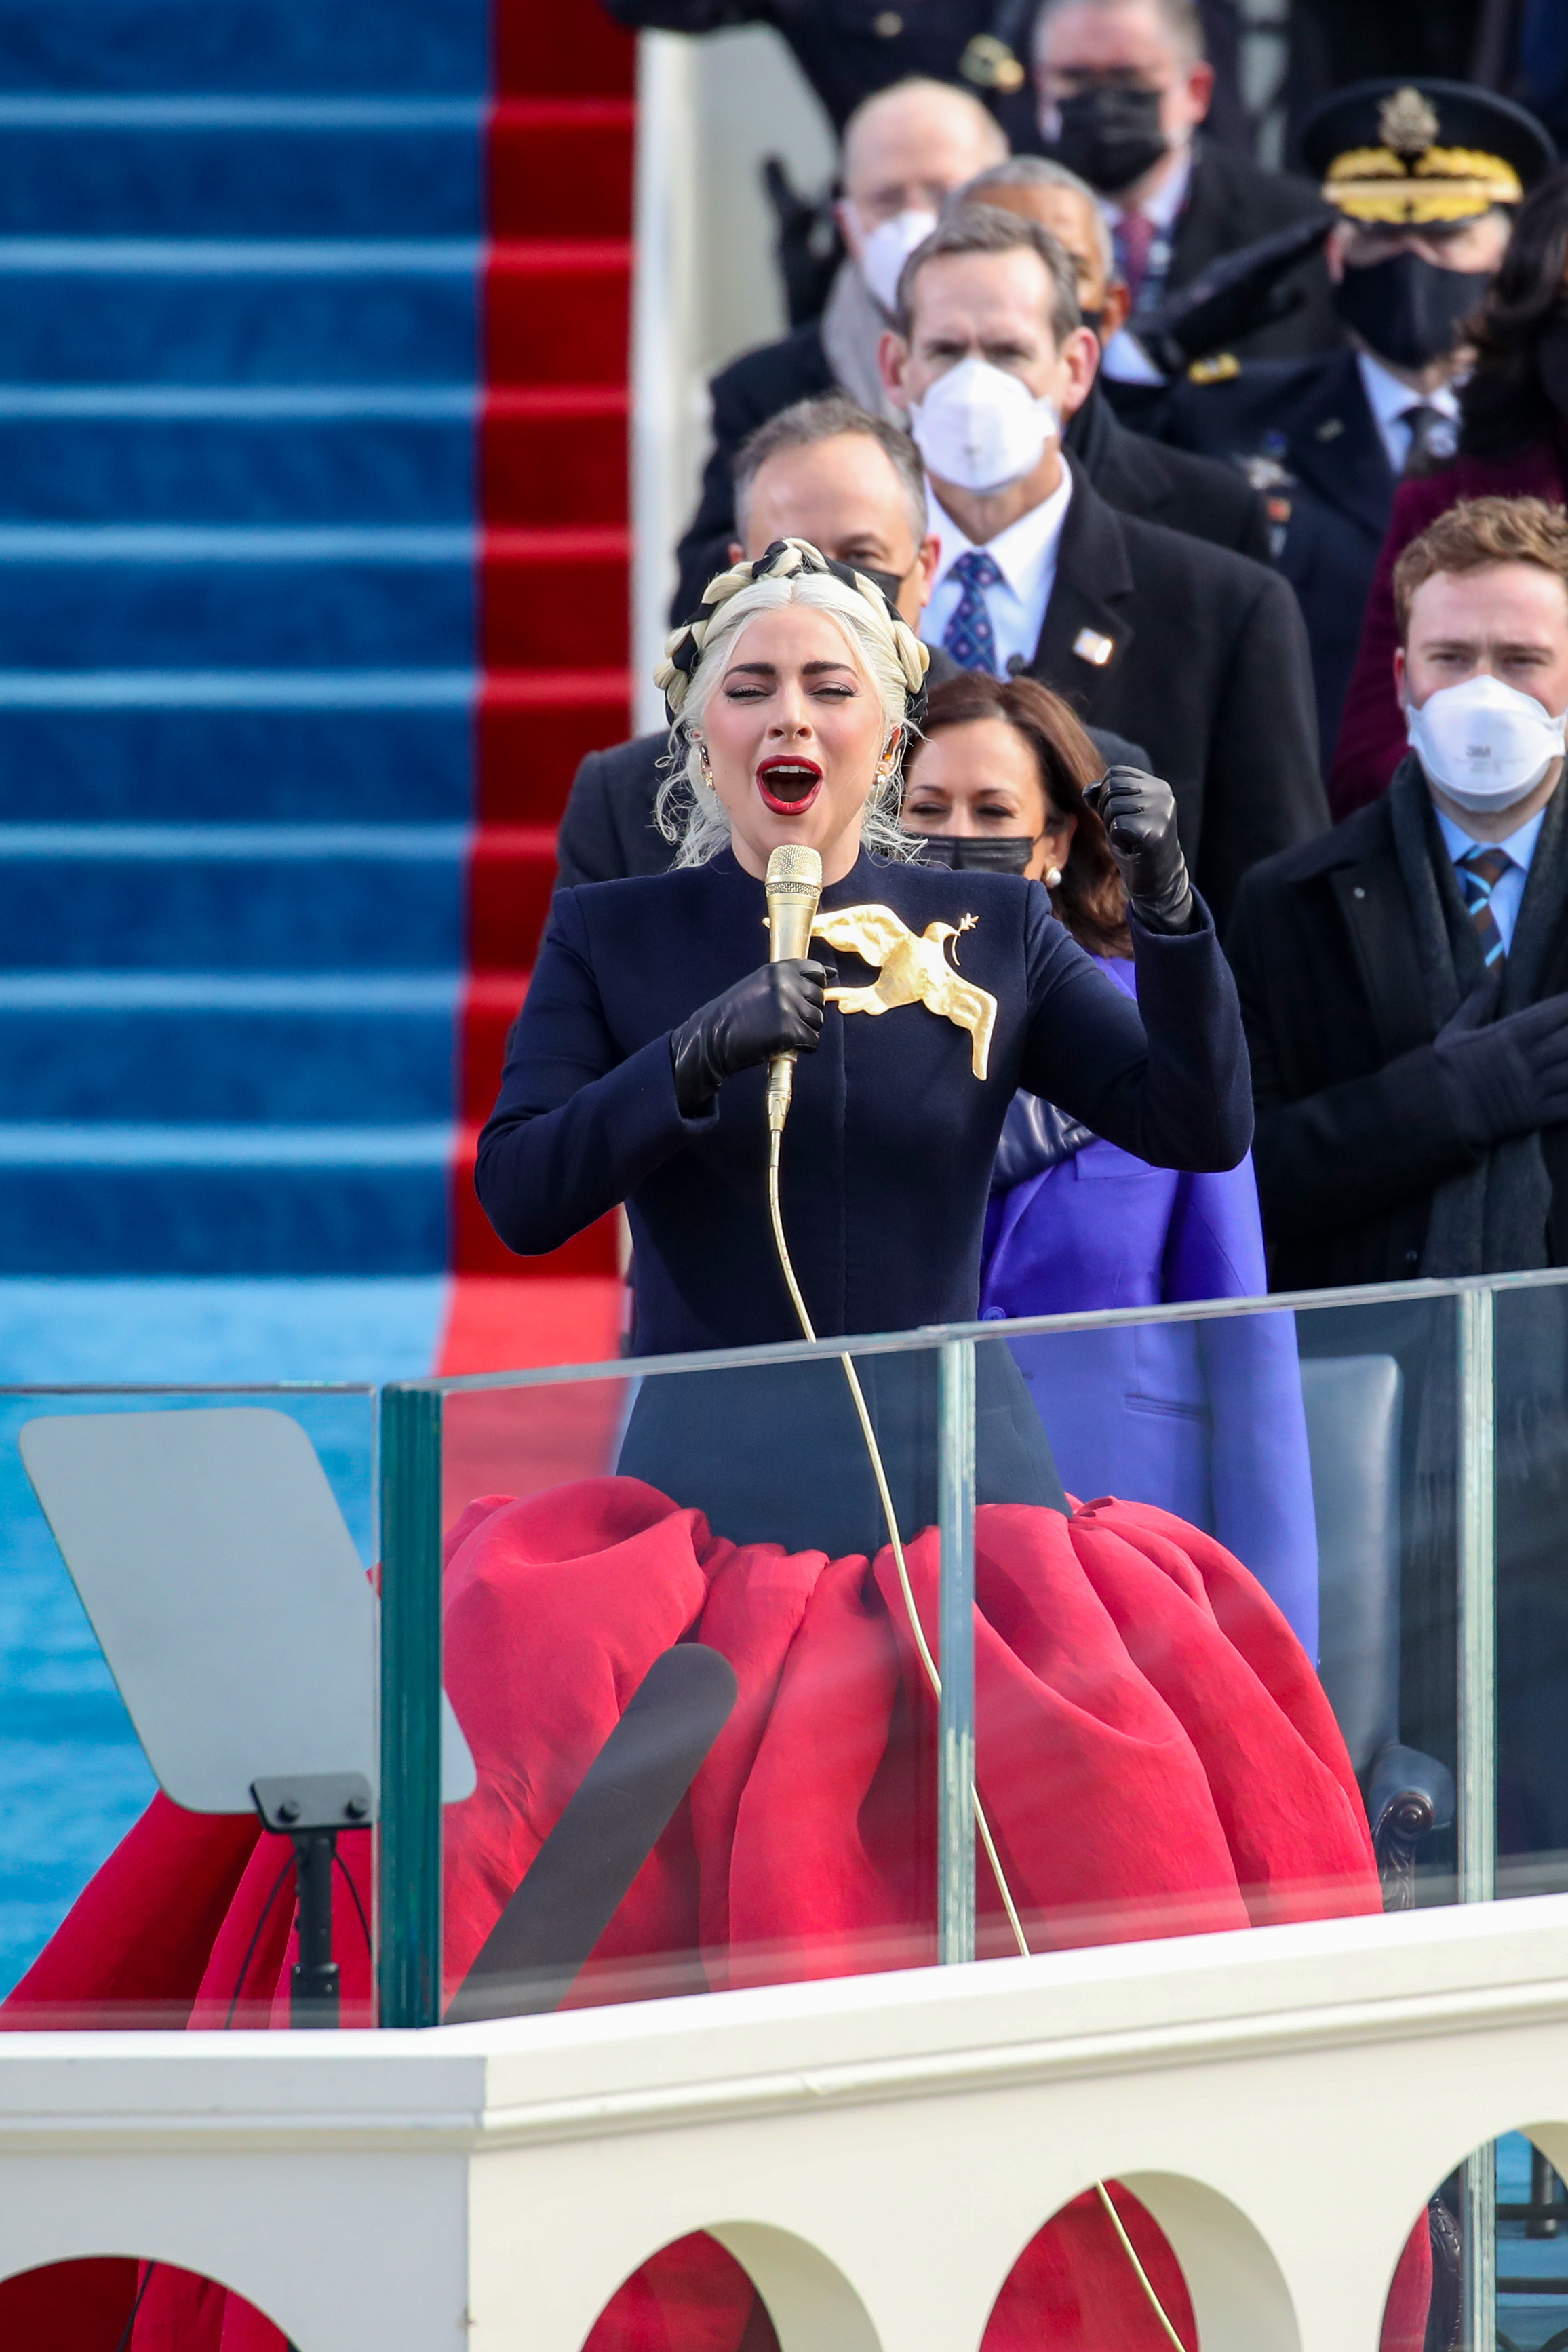 The coordinated coats worn at the Biden inauguration were